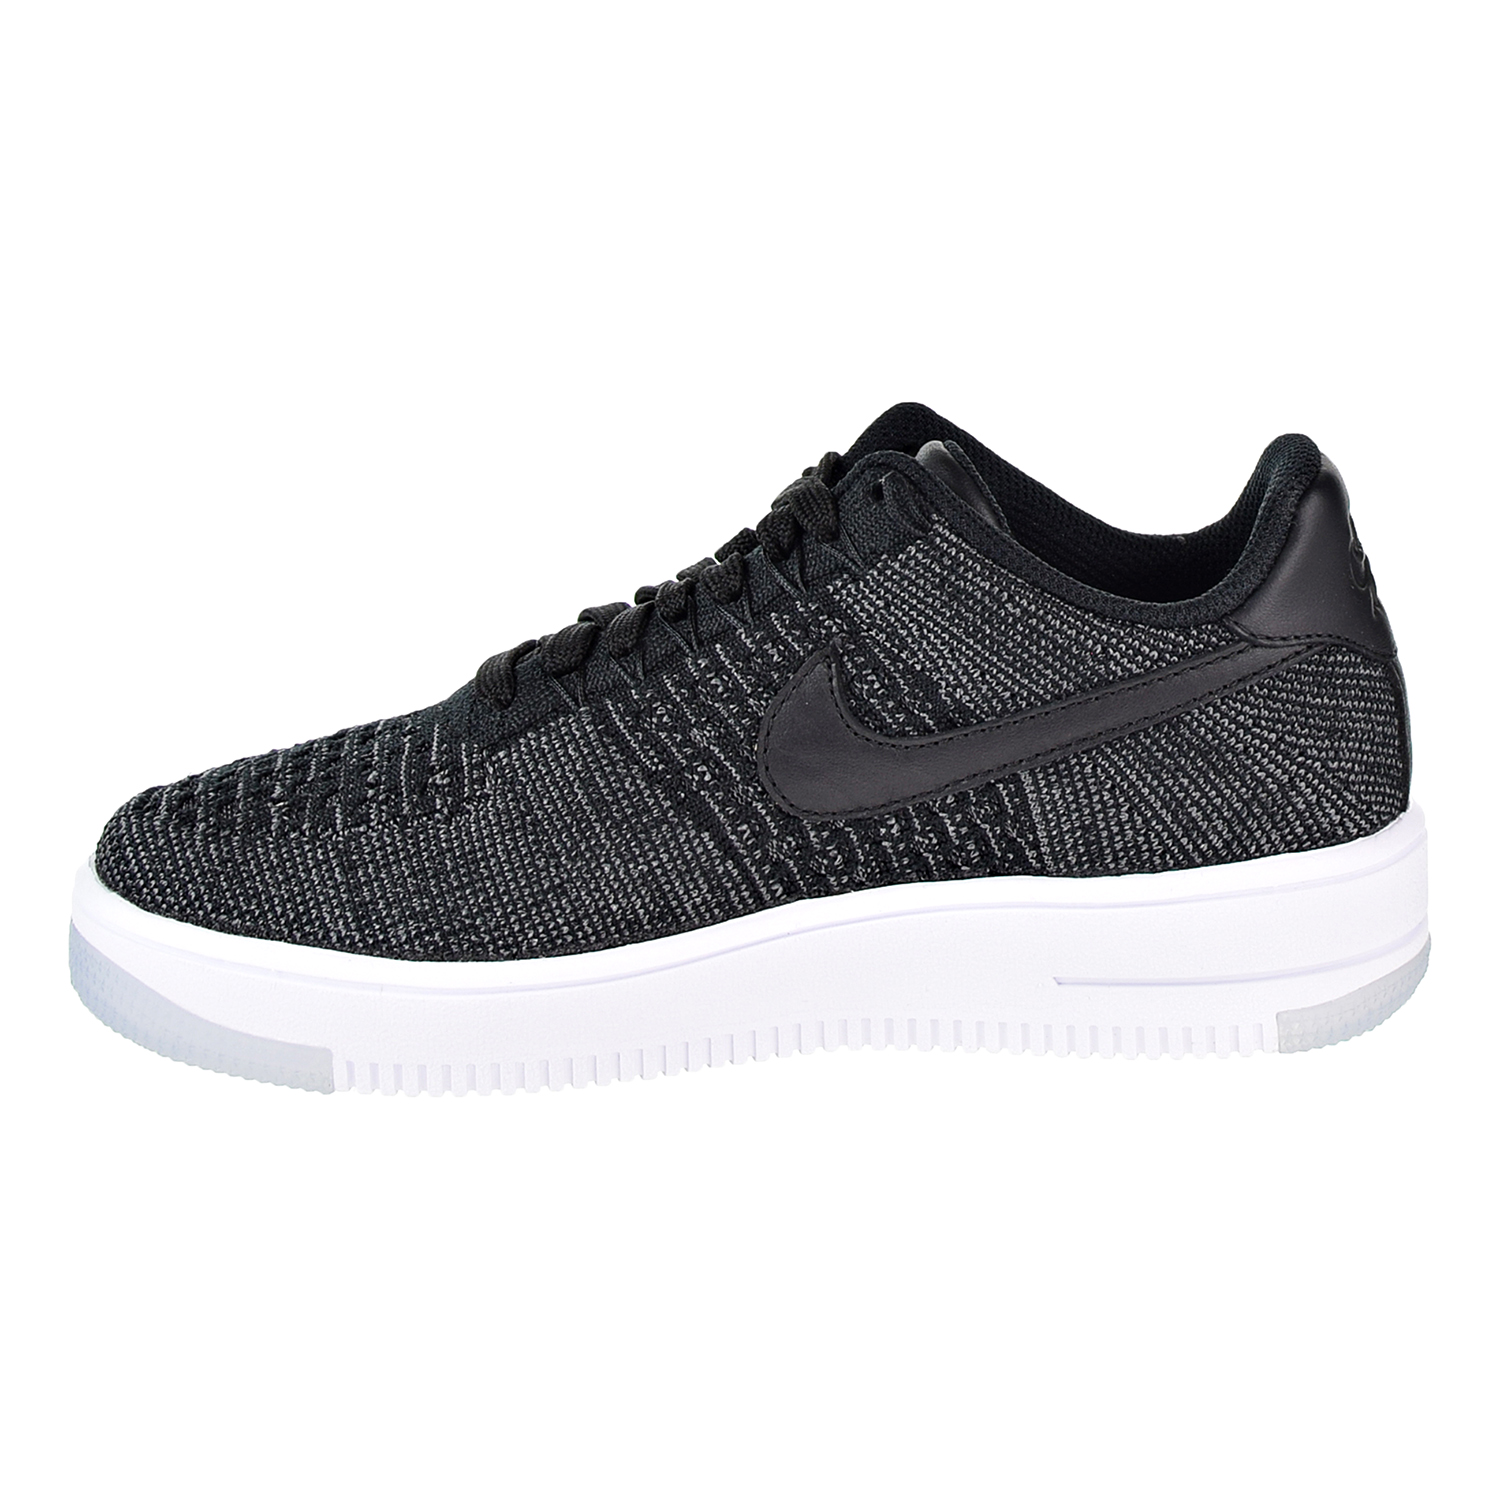 Nike Air af1 flyknit Force 1 Flyknit Low Women's Shoes Black/White 820256-001